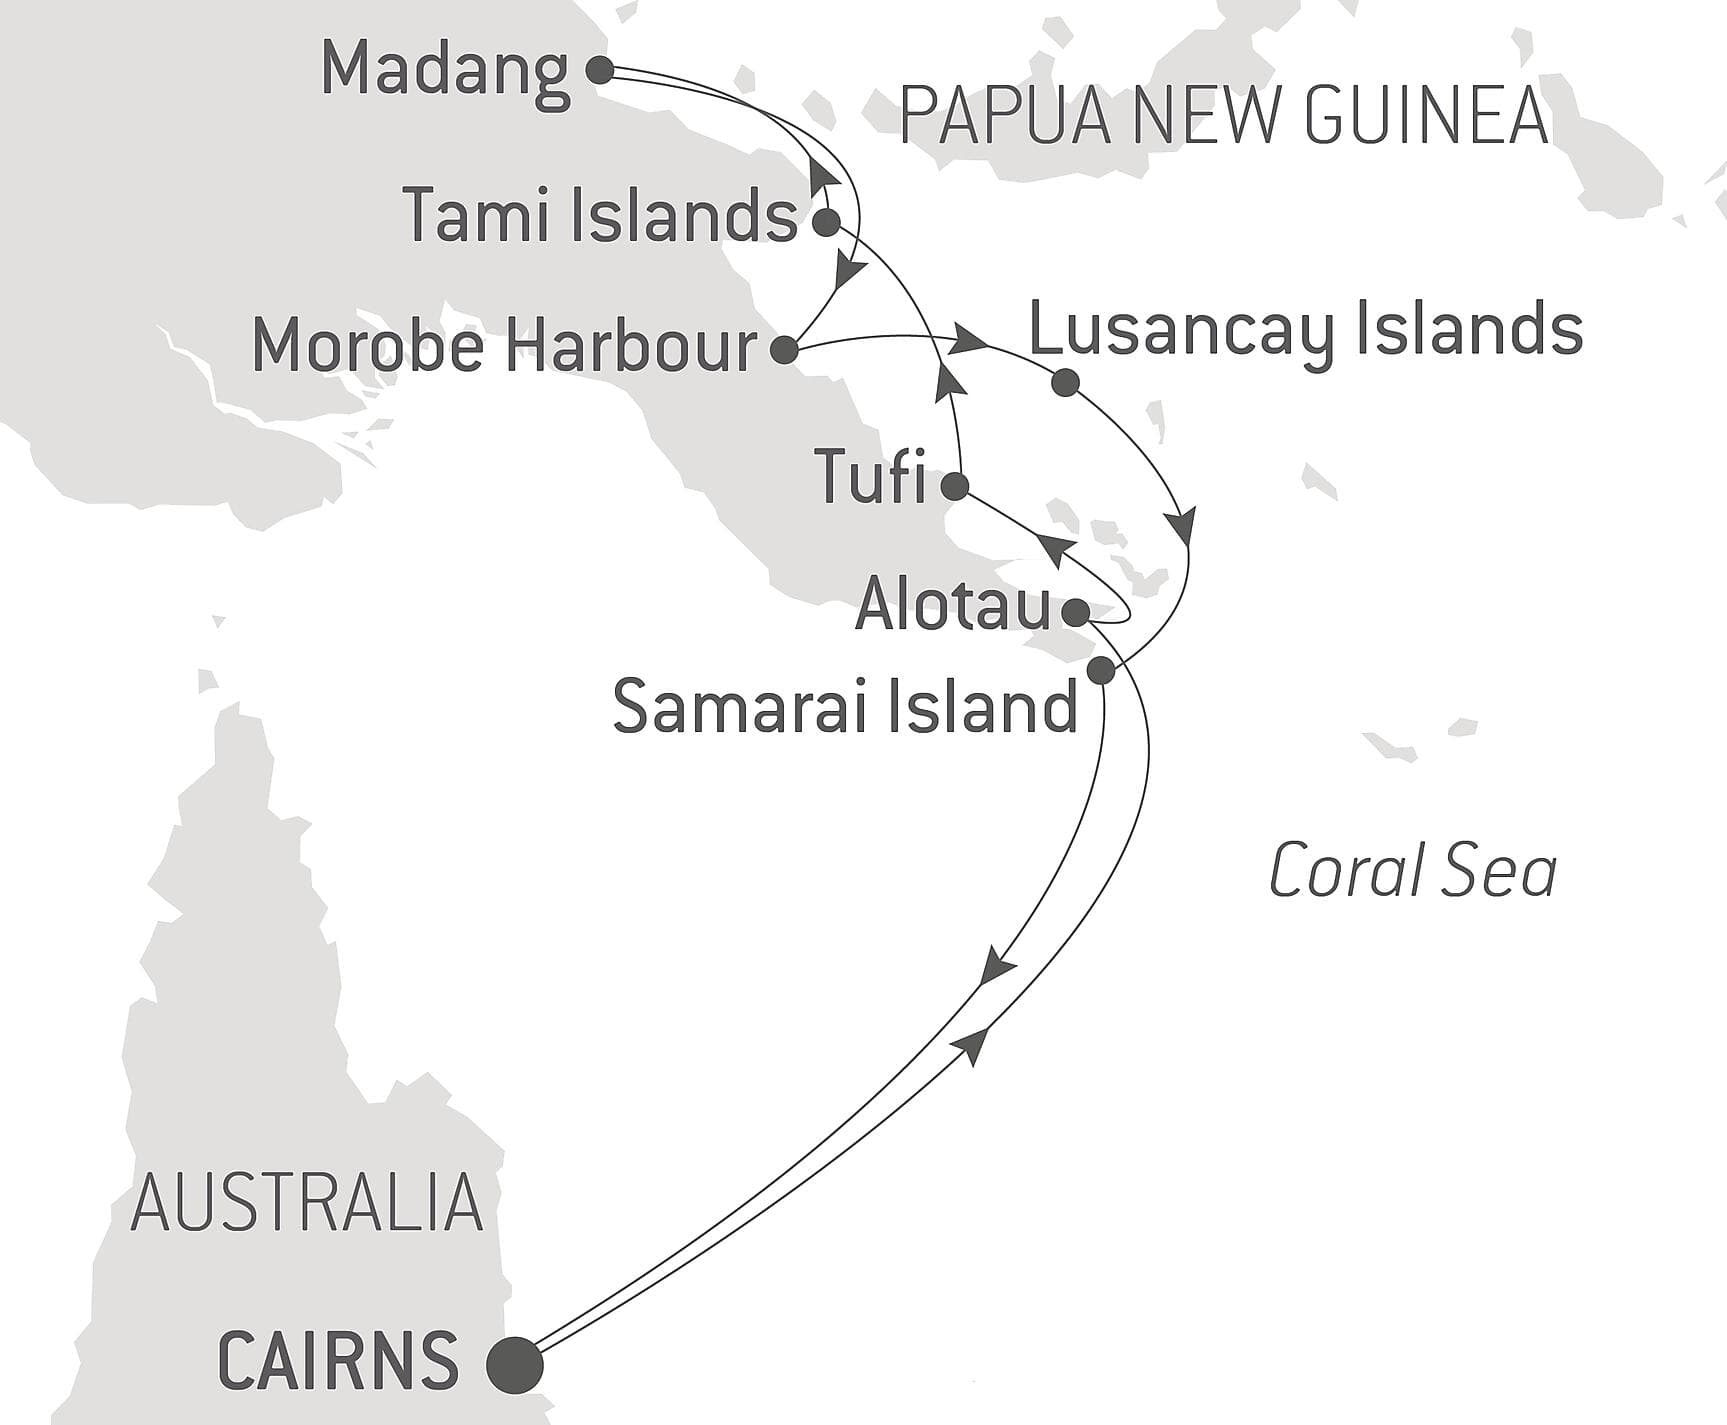 Islands and Cultures of Papua New Guinea